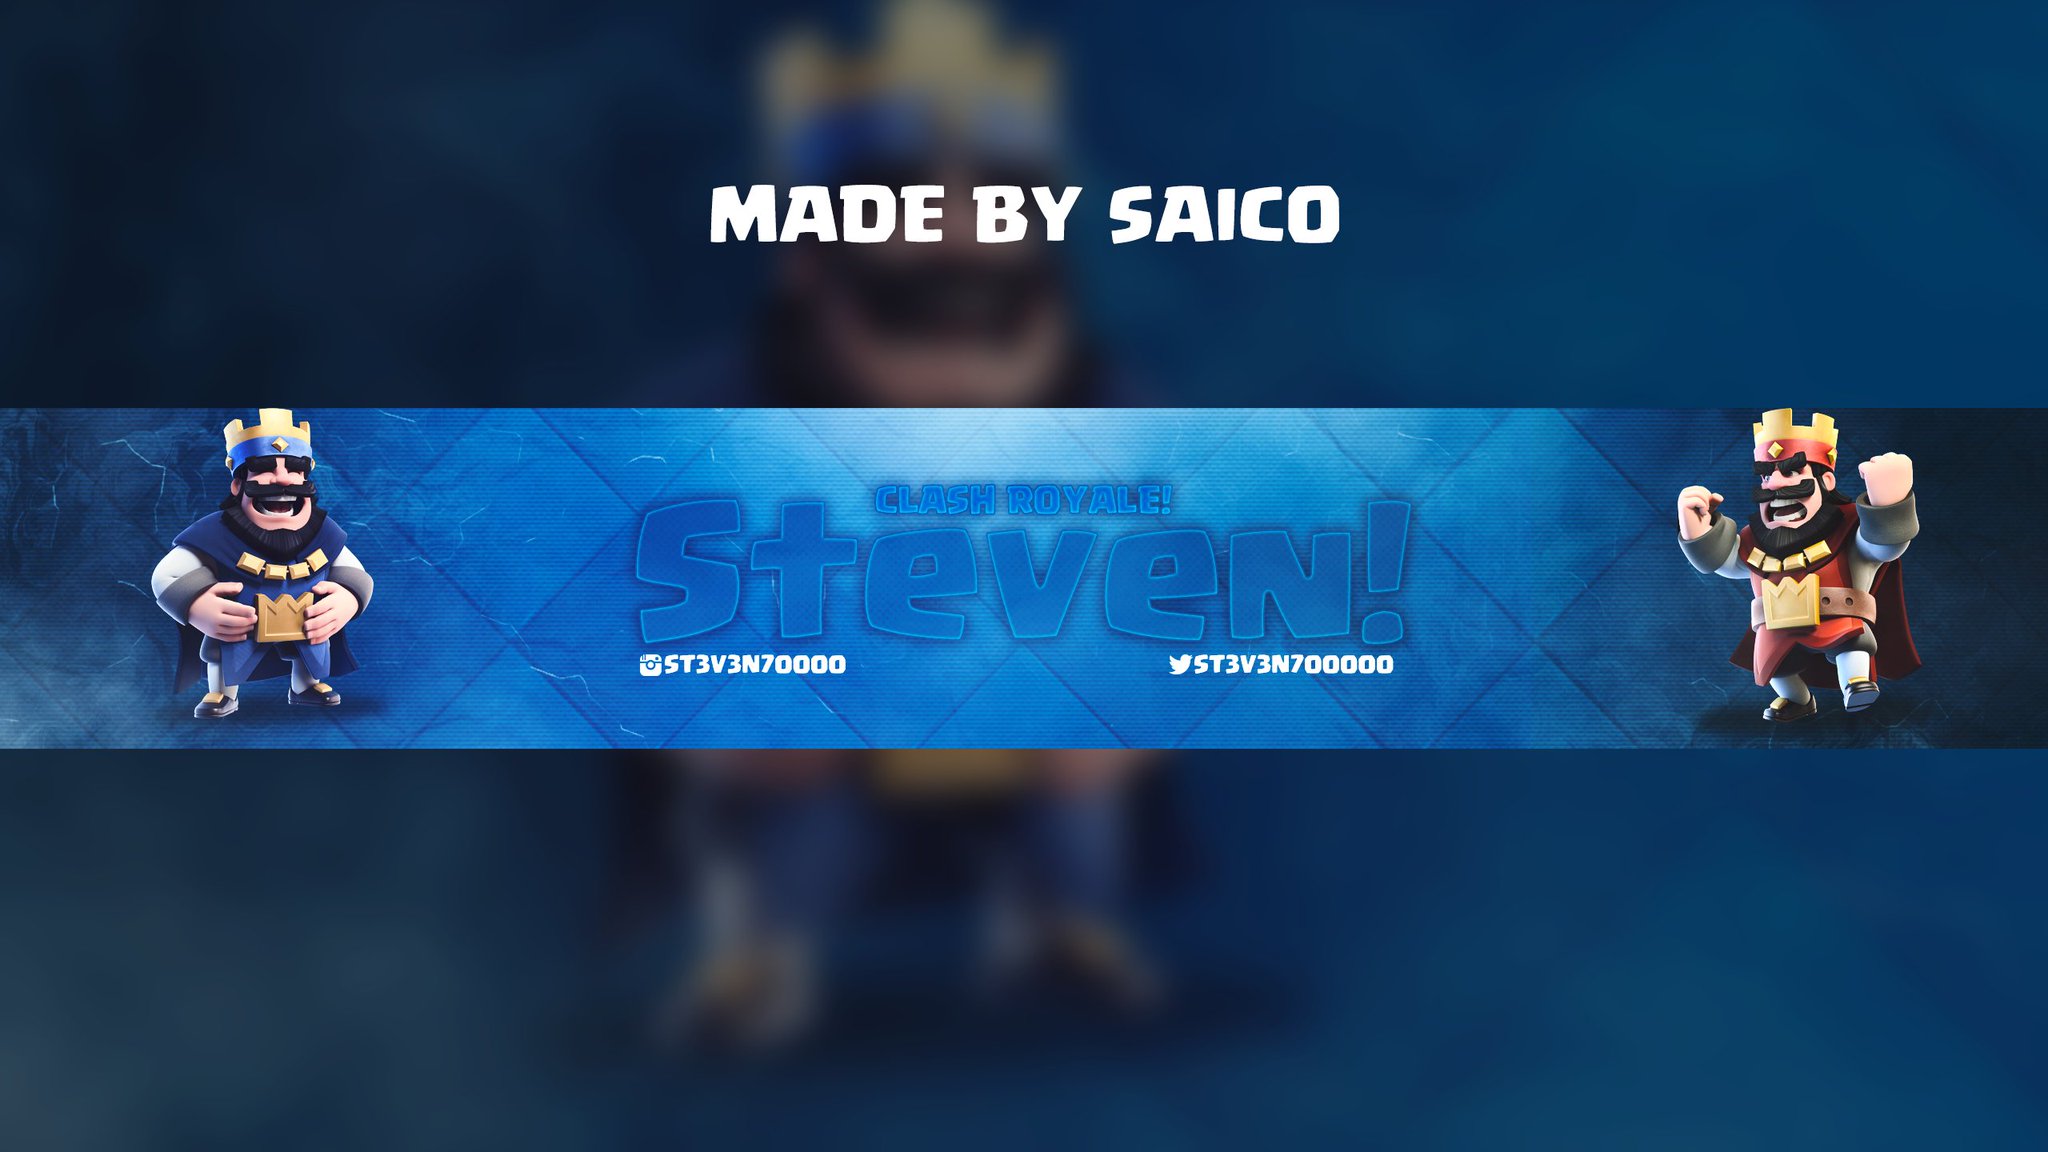 Saicoooo On Twitter Made This Clash Royale Banner For The Youtuber